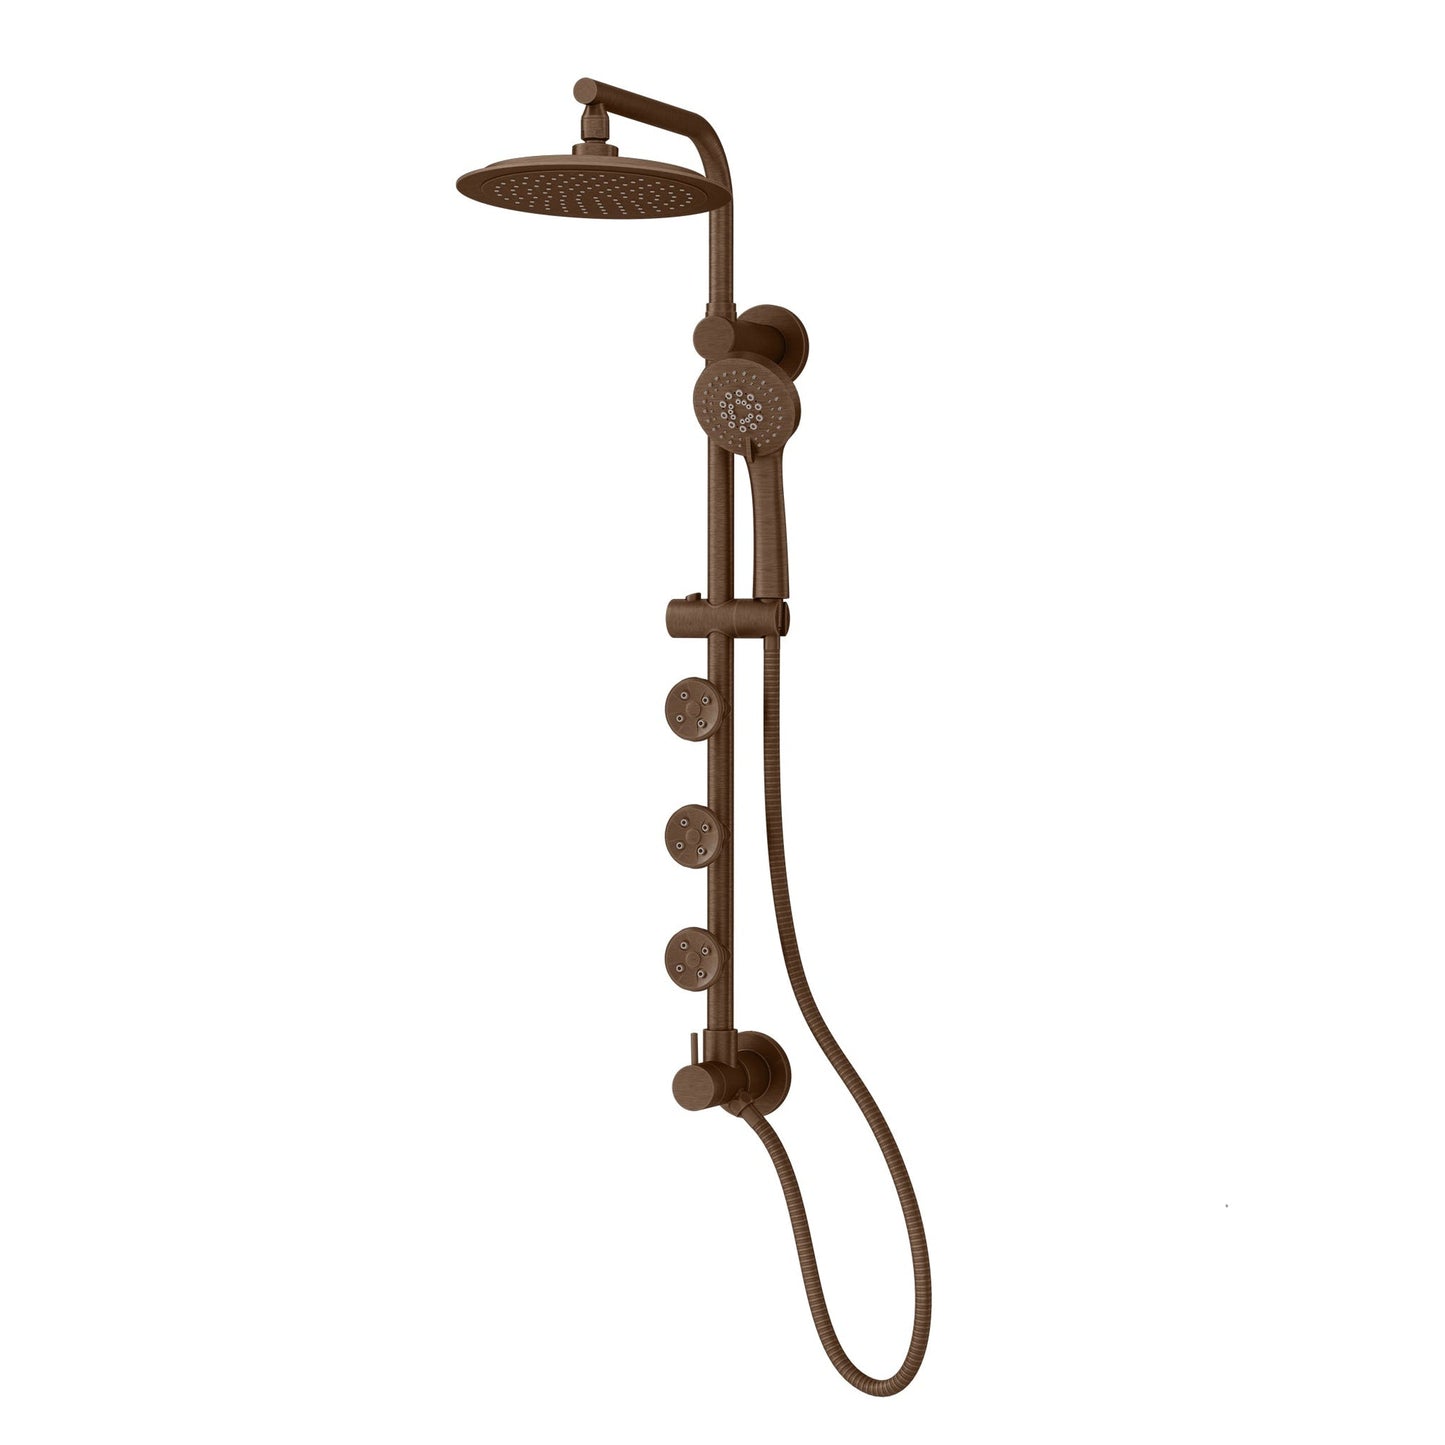 PULSE ShowerSpas Lanai 1.8 GPM Rain Shower System in Oil Rubbed Bronze With 3-Power Spray Body Jet and 3-Function Hand Shower